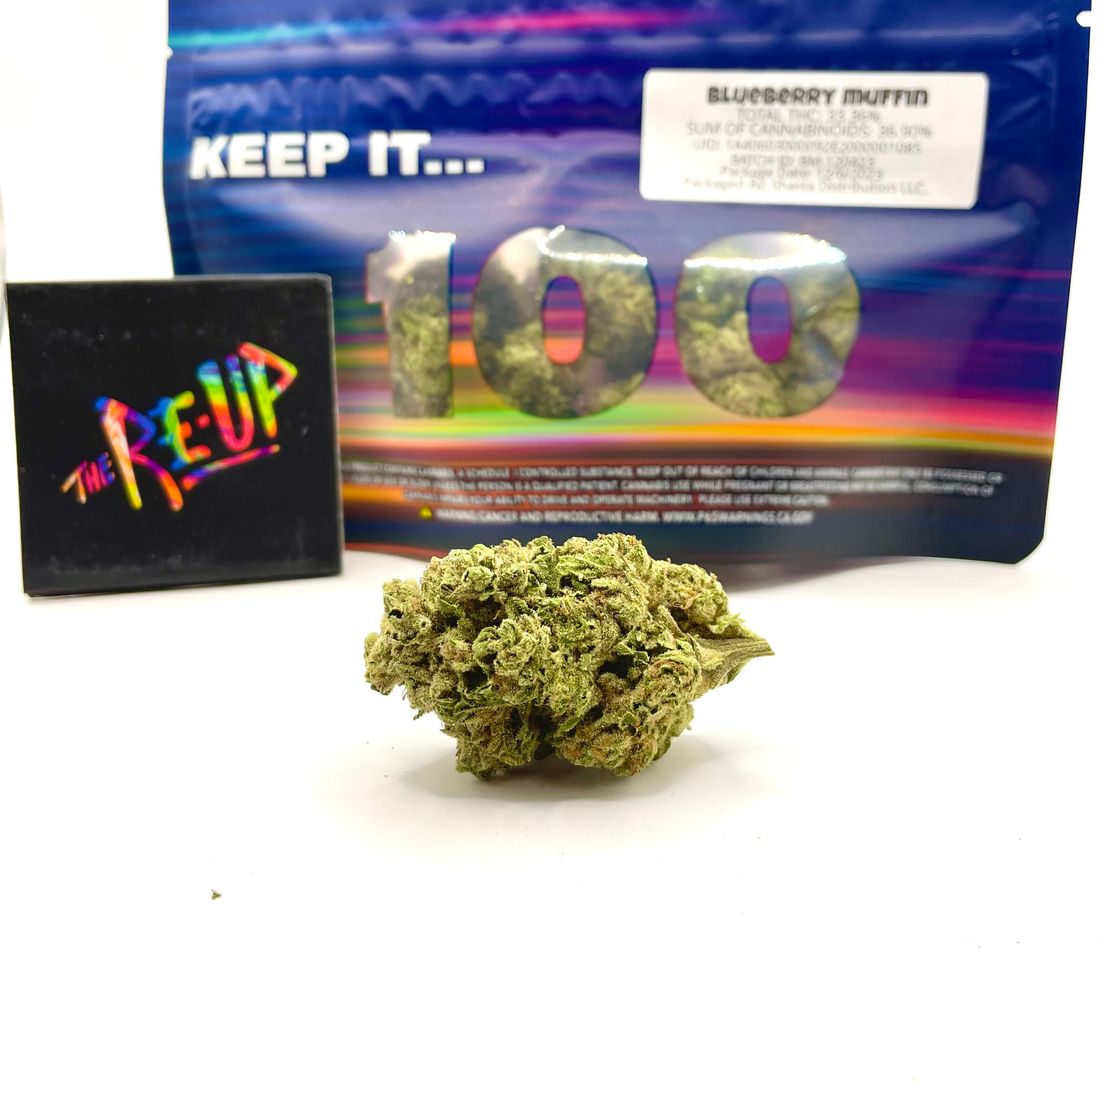 *Deal! $75 1/2 oz. Blueberry Muffin (33.36%/Hybrid - Indica Dom.) - Keep it 100 + Rolling Papers *Disclaimer